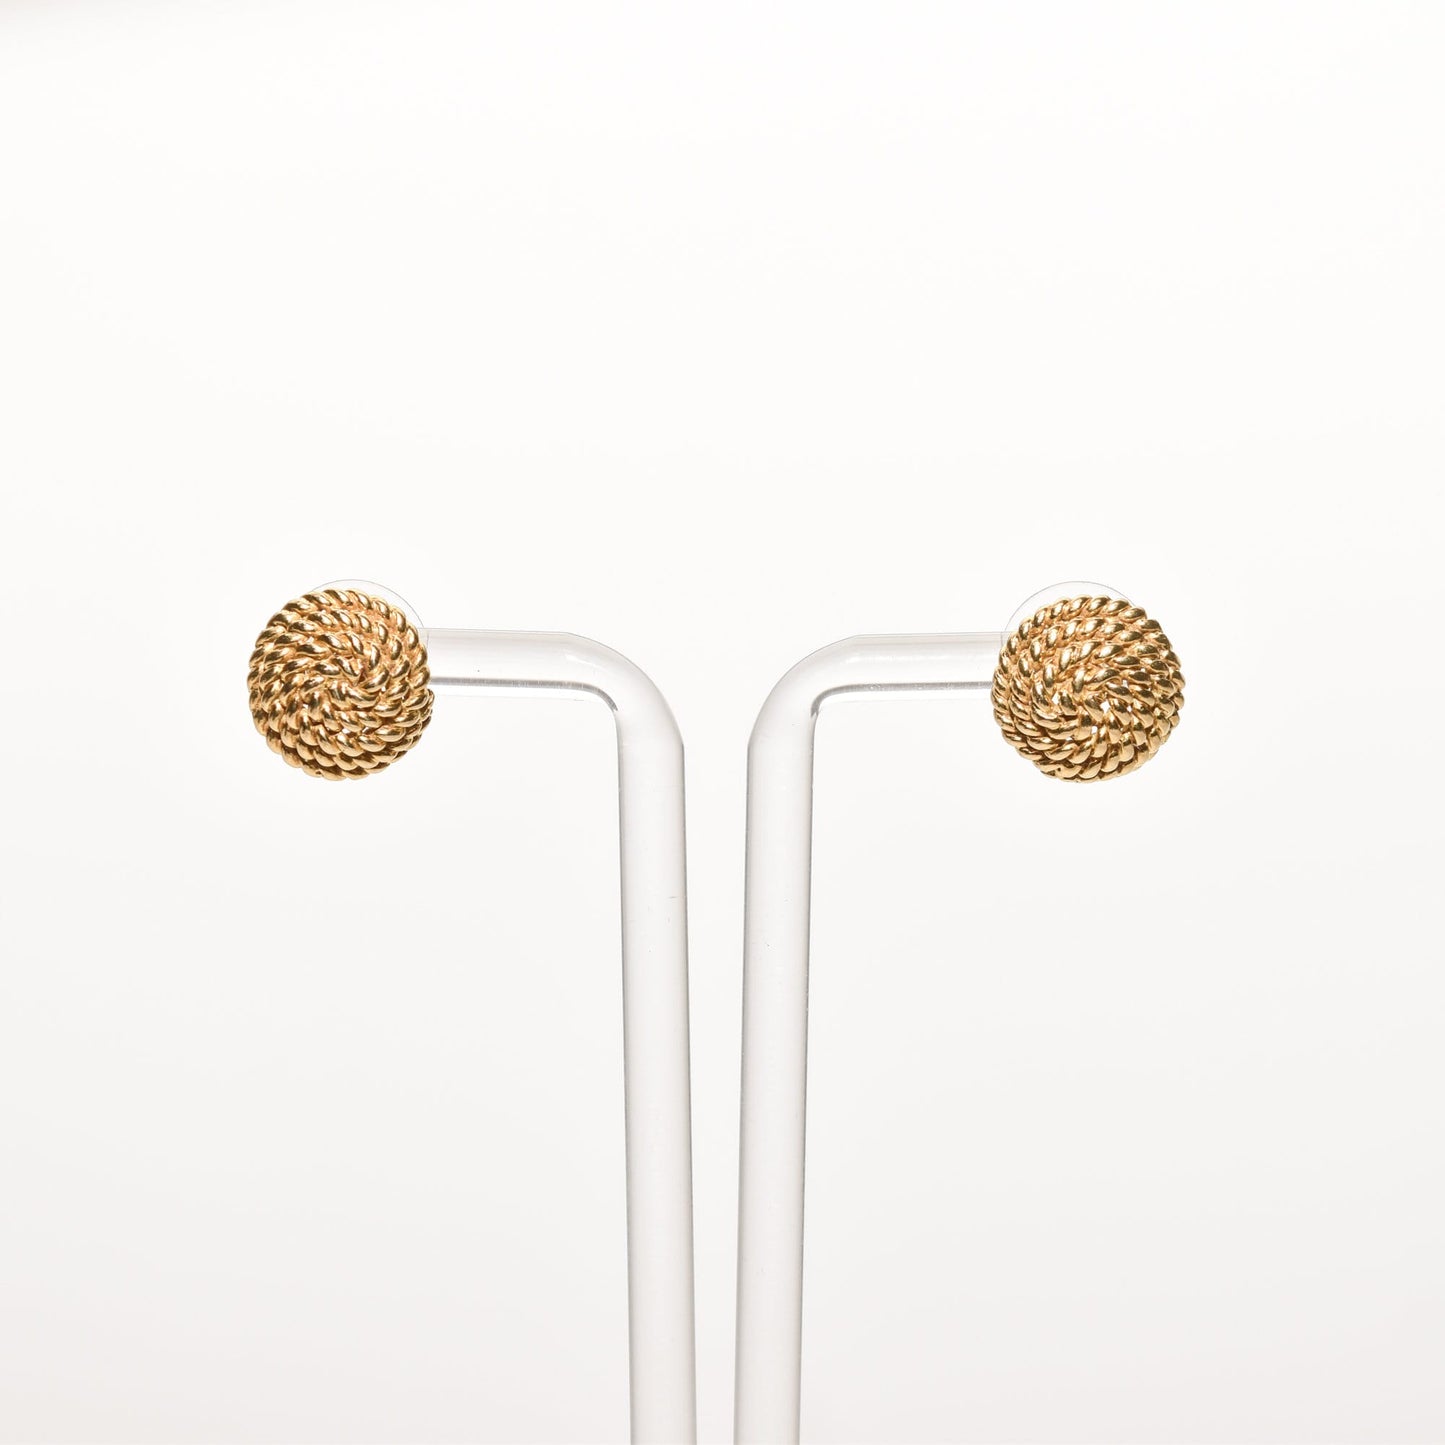 Tiffany & Co Schlumberger 18K gold woven button stud earrings on display, coiled rope design, luxury estate jewelry, 14.5mm diameter